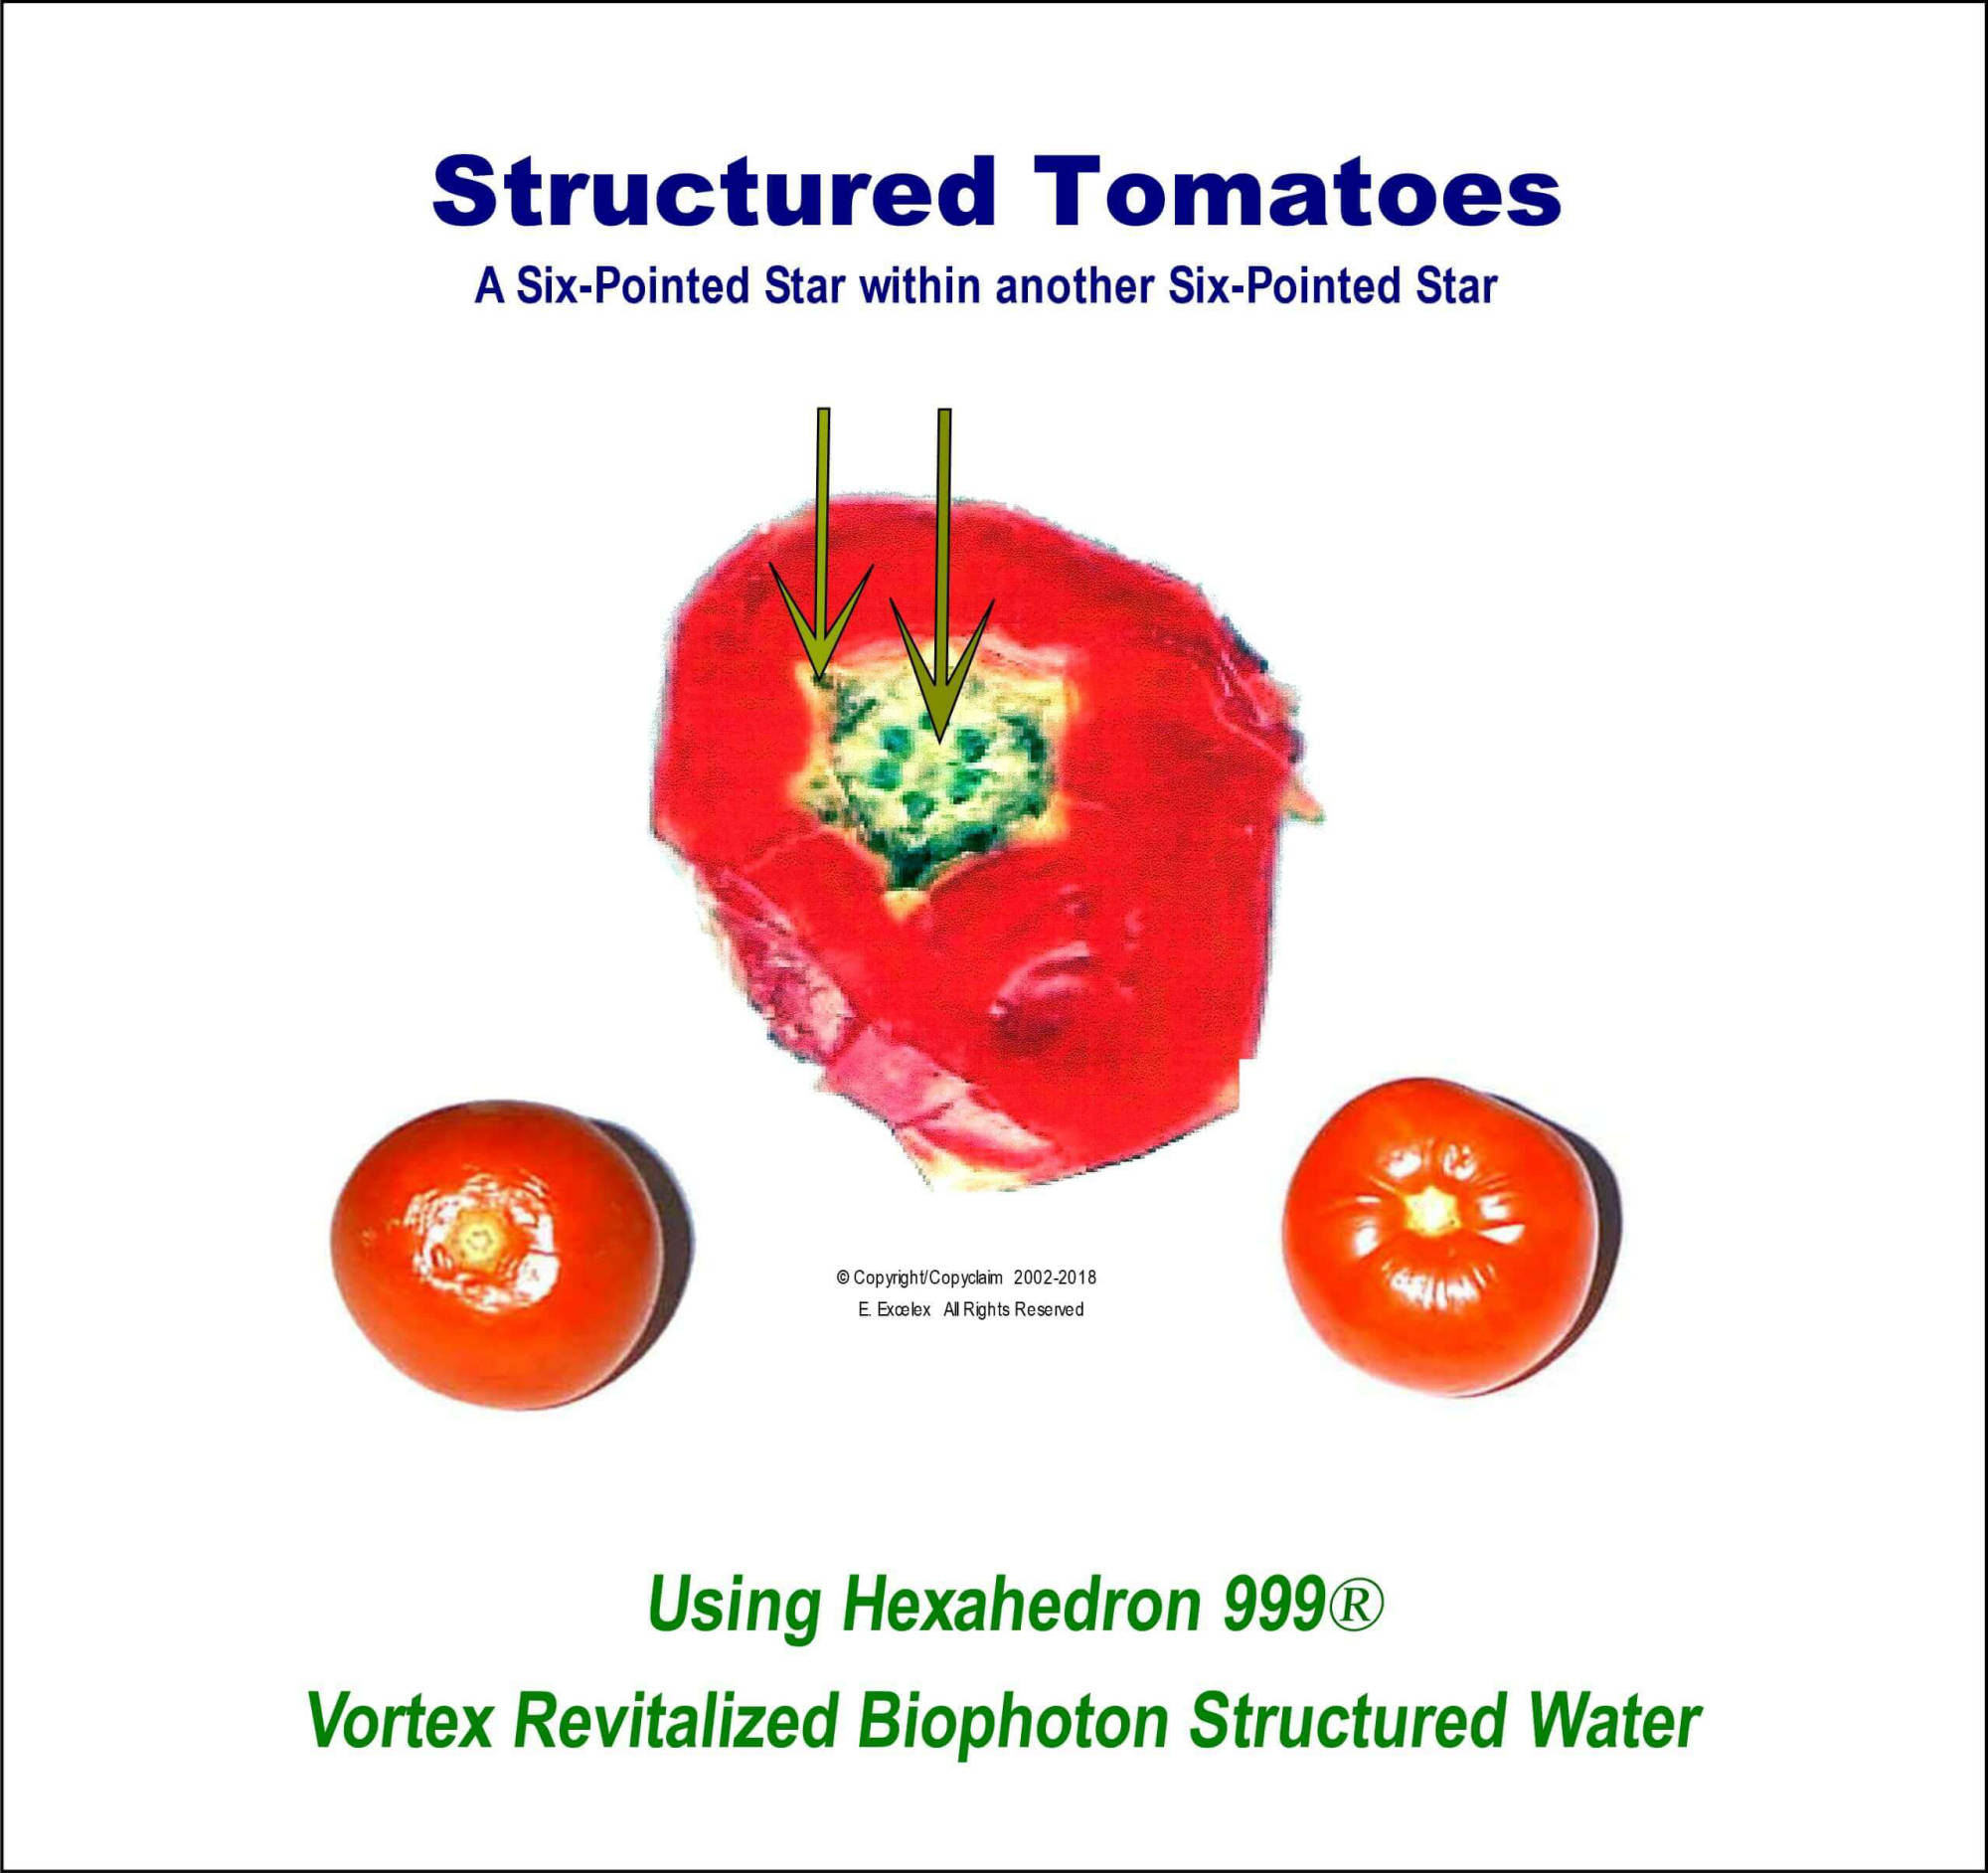 Structured Tomatoes using Hexahedron 999 Vortex Revitalized Structured Biophoton Water